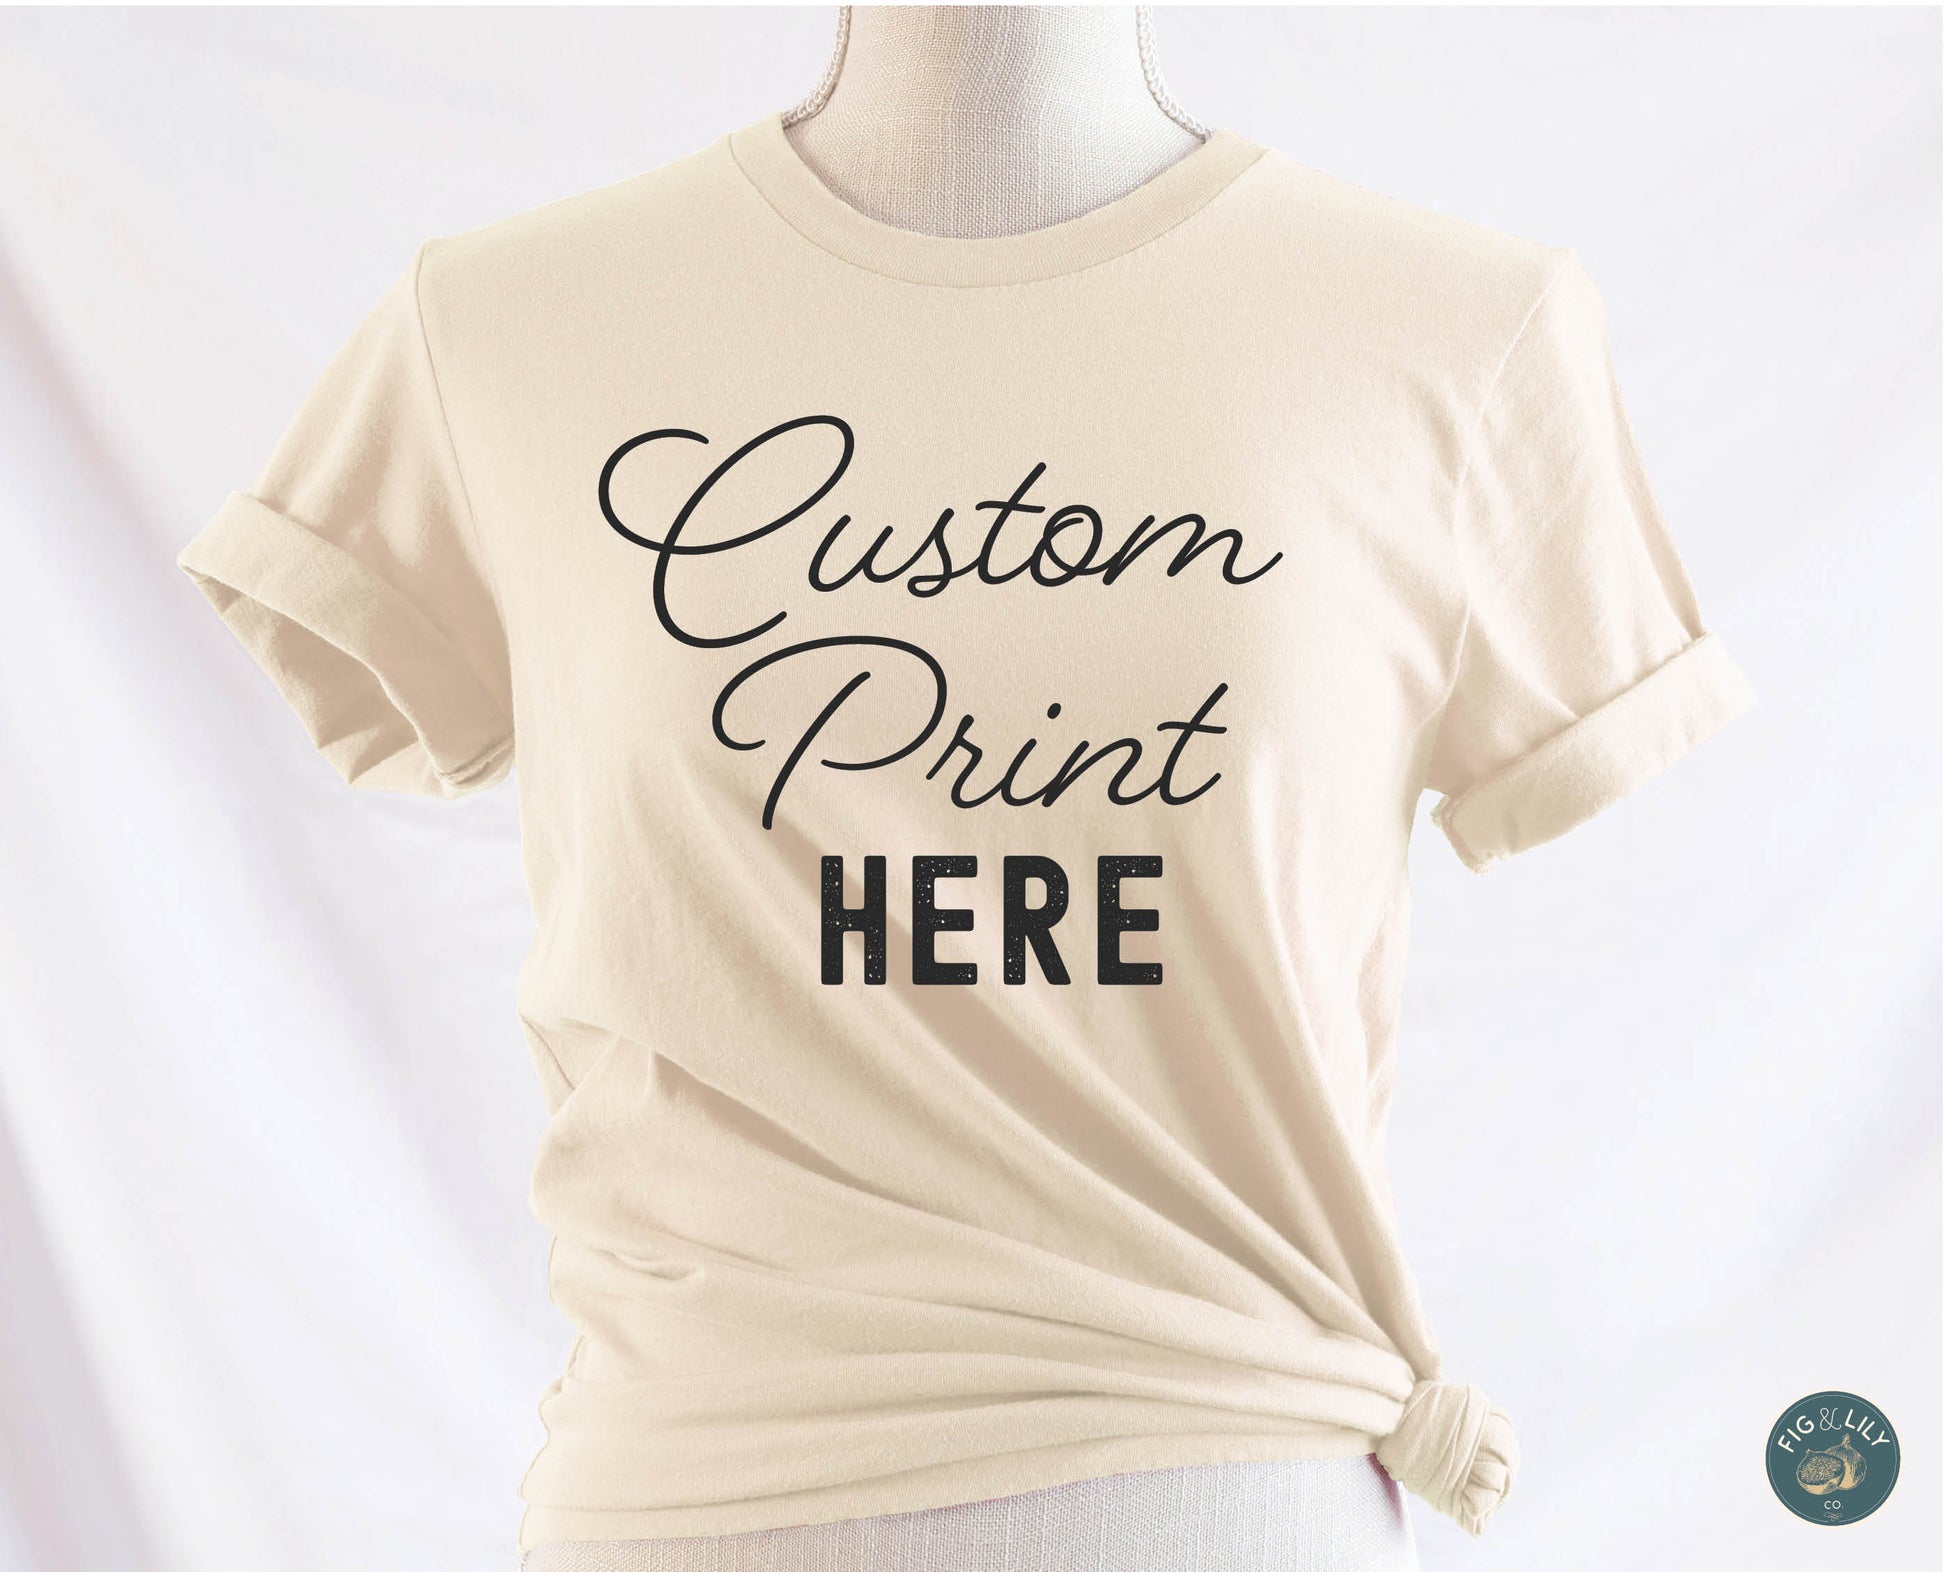 Fig & Lily Co. custom soft cream unisex t-shirt with your personalized design printed, custom graphic design tees for men and women